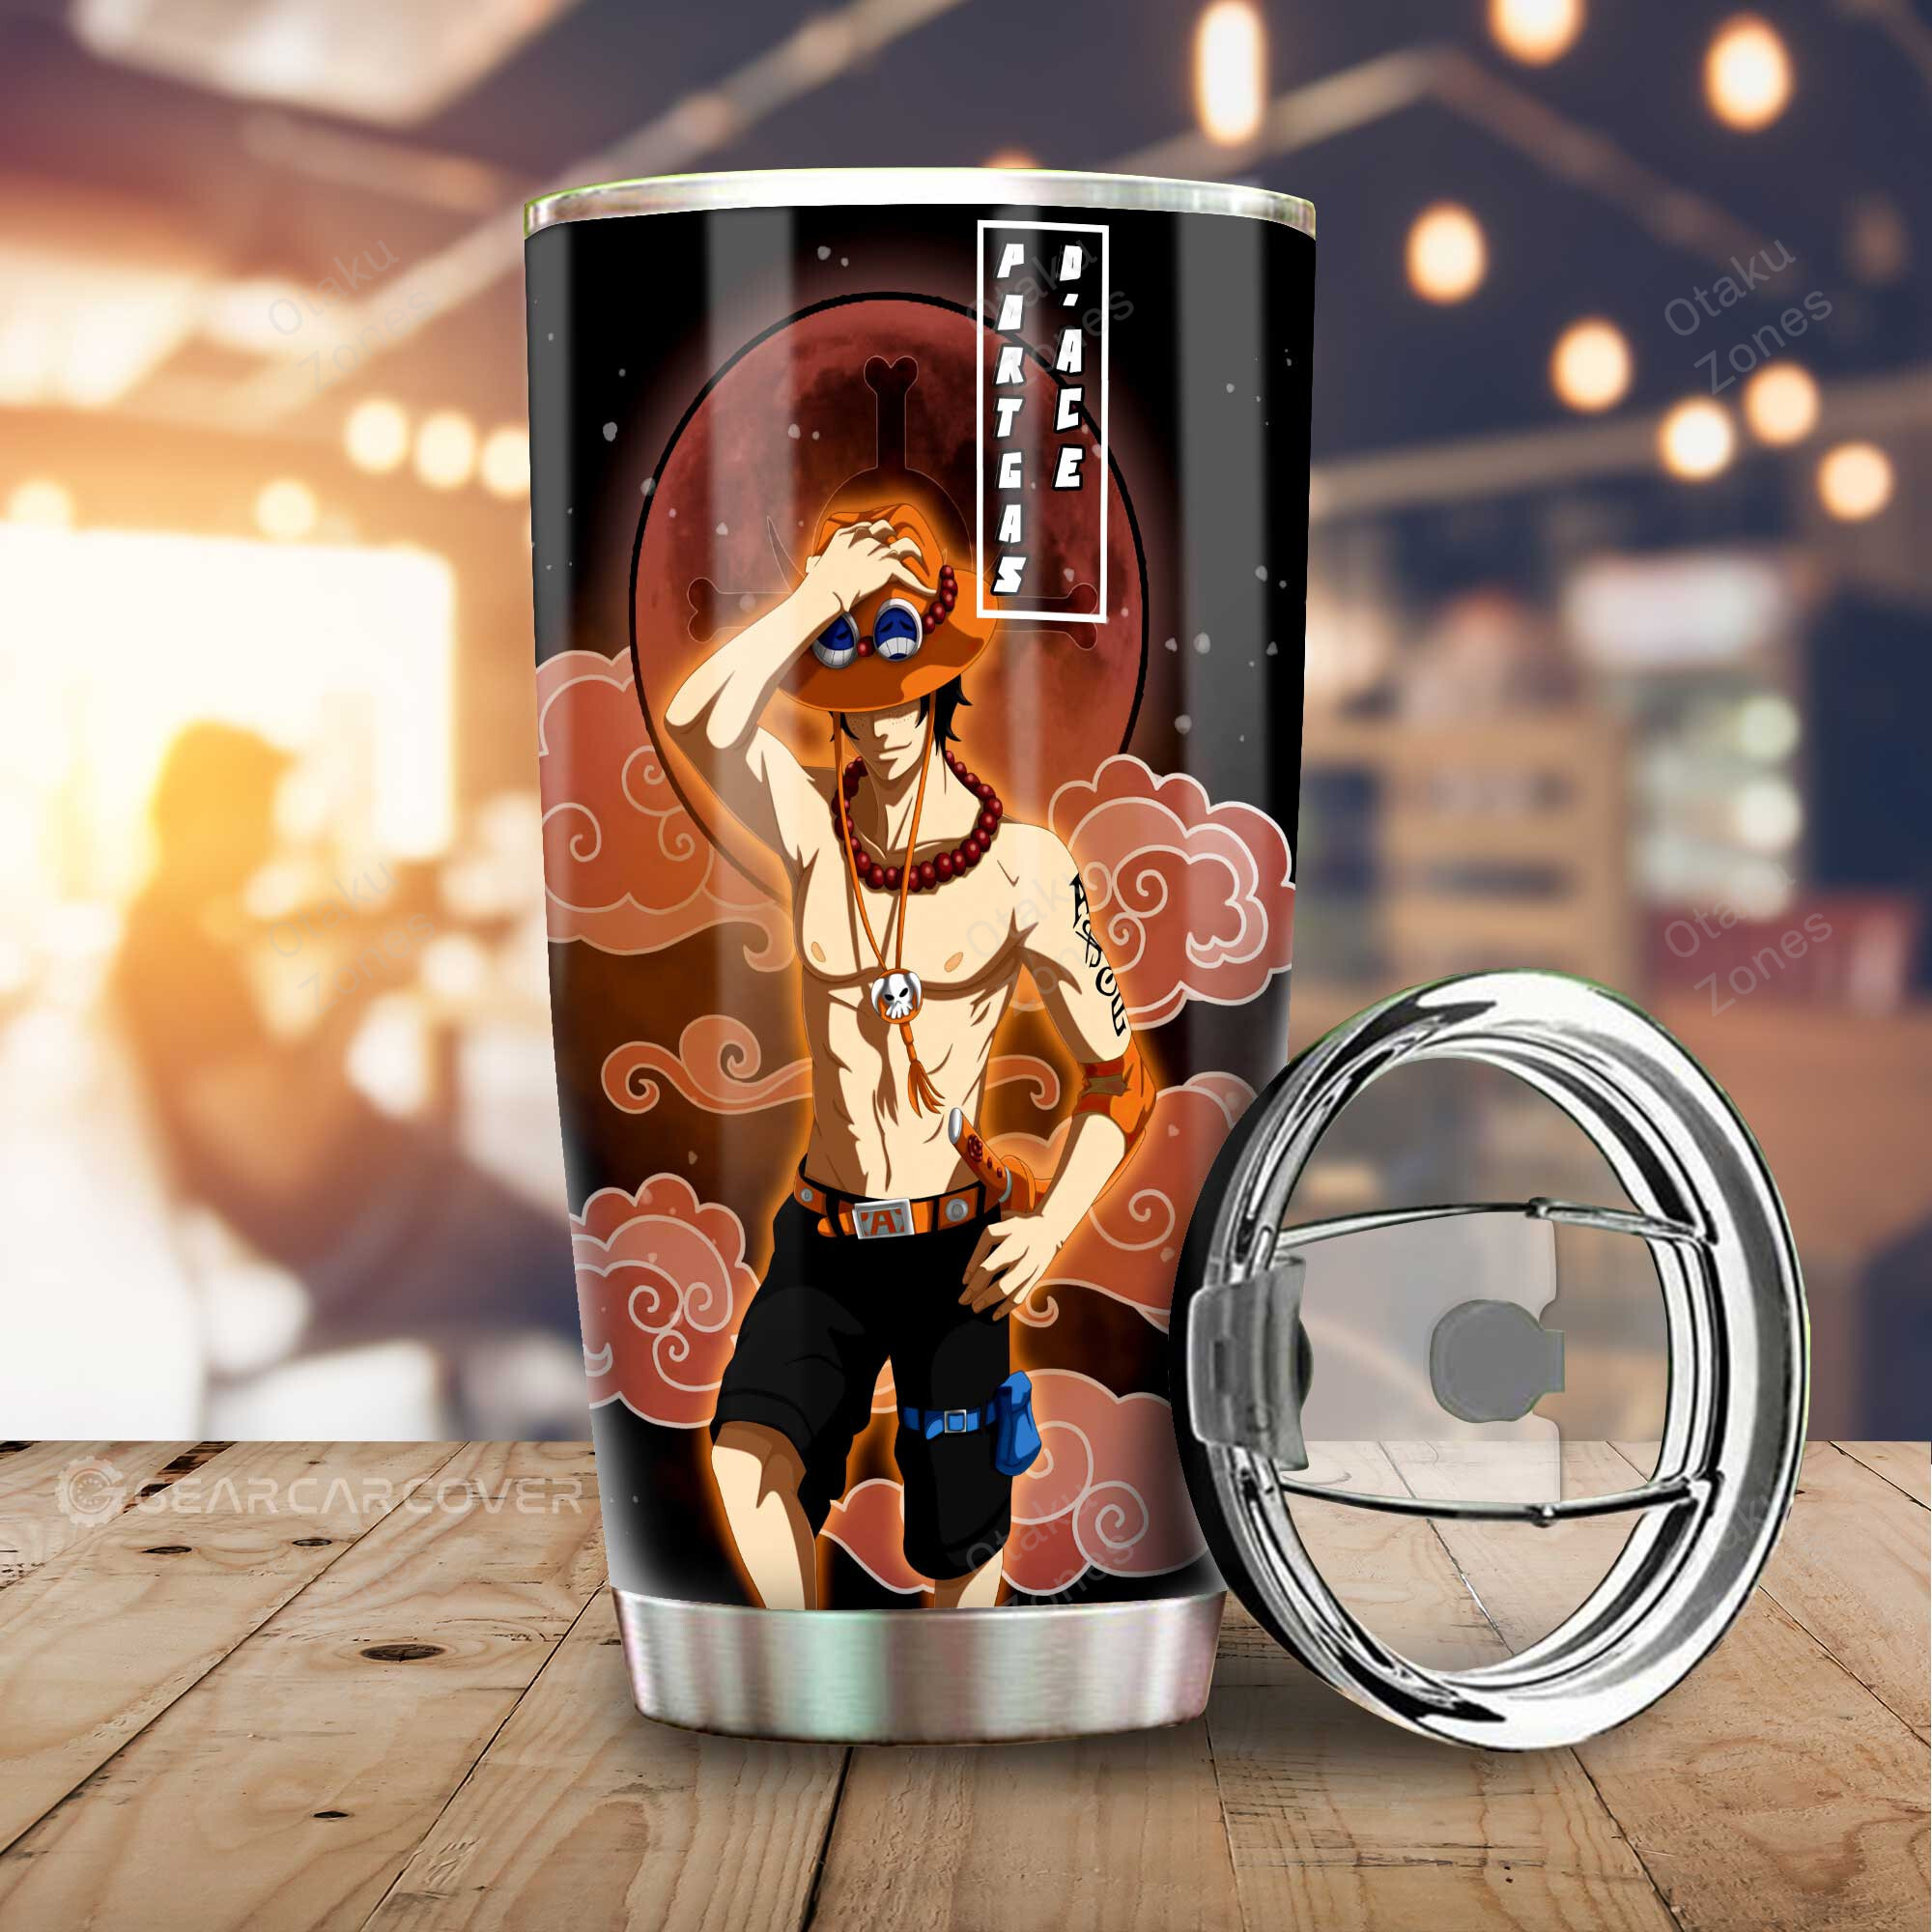 Go ahead and order your new tumbler now! 101